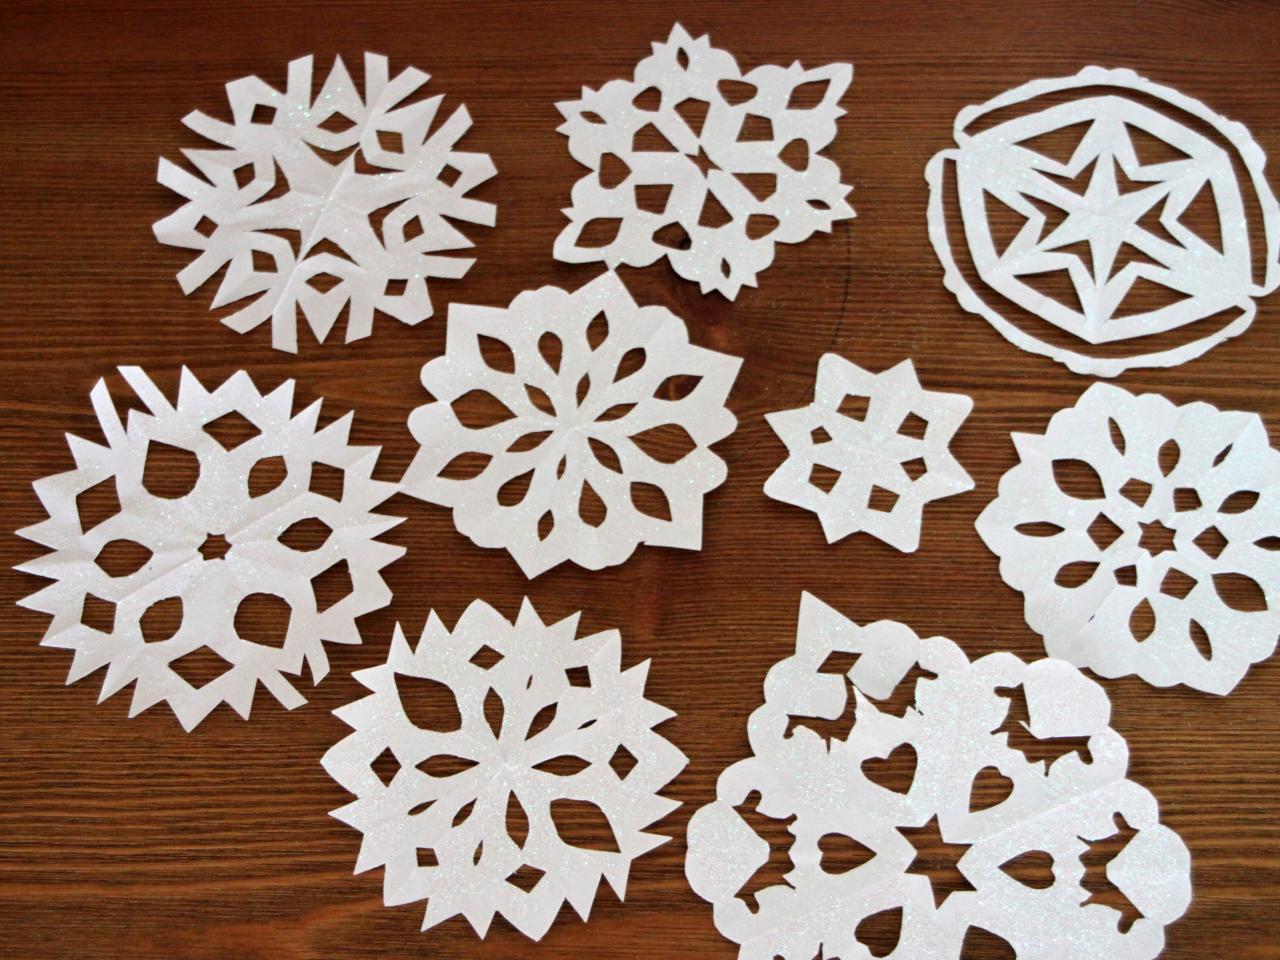 How to Make Paper Snowflakes - An Easy Step-by-Step Guide